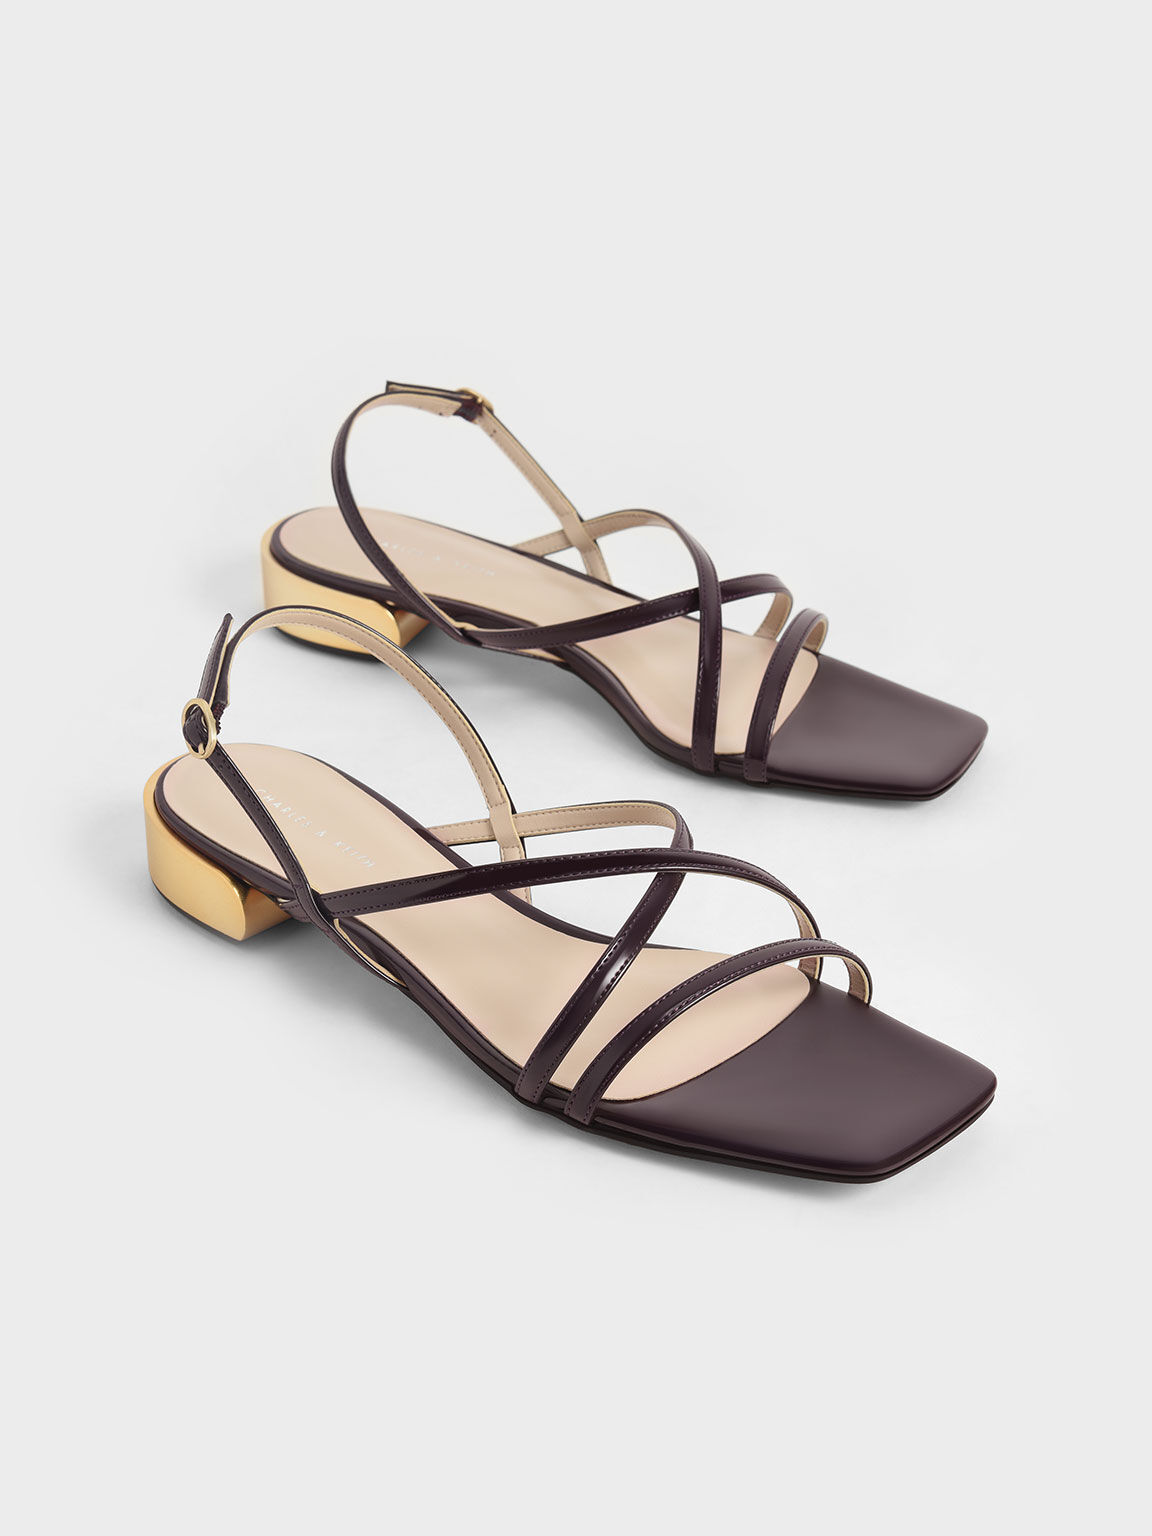 Patent Strappy Slingback Sandals, Maroon, hi-res